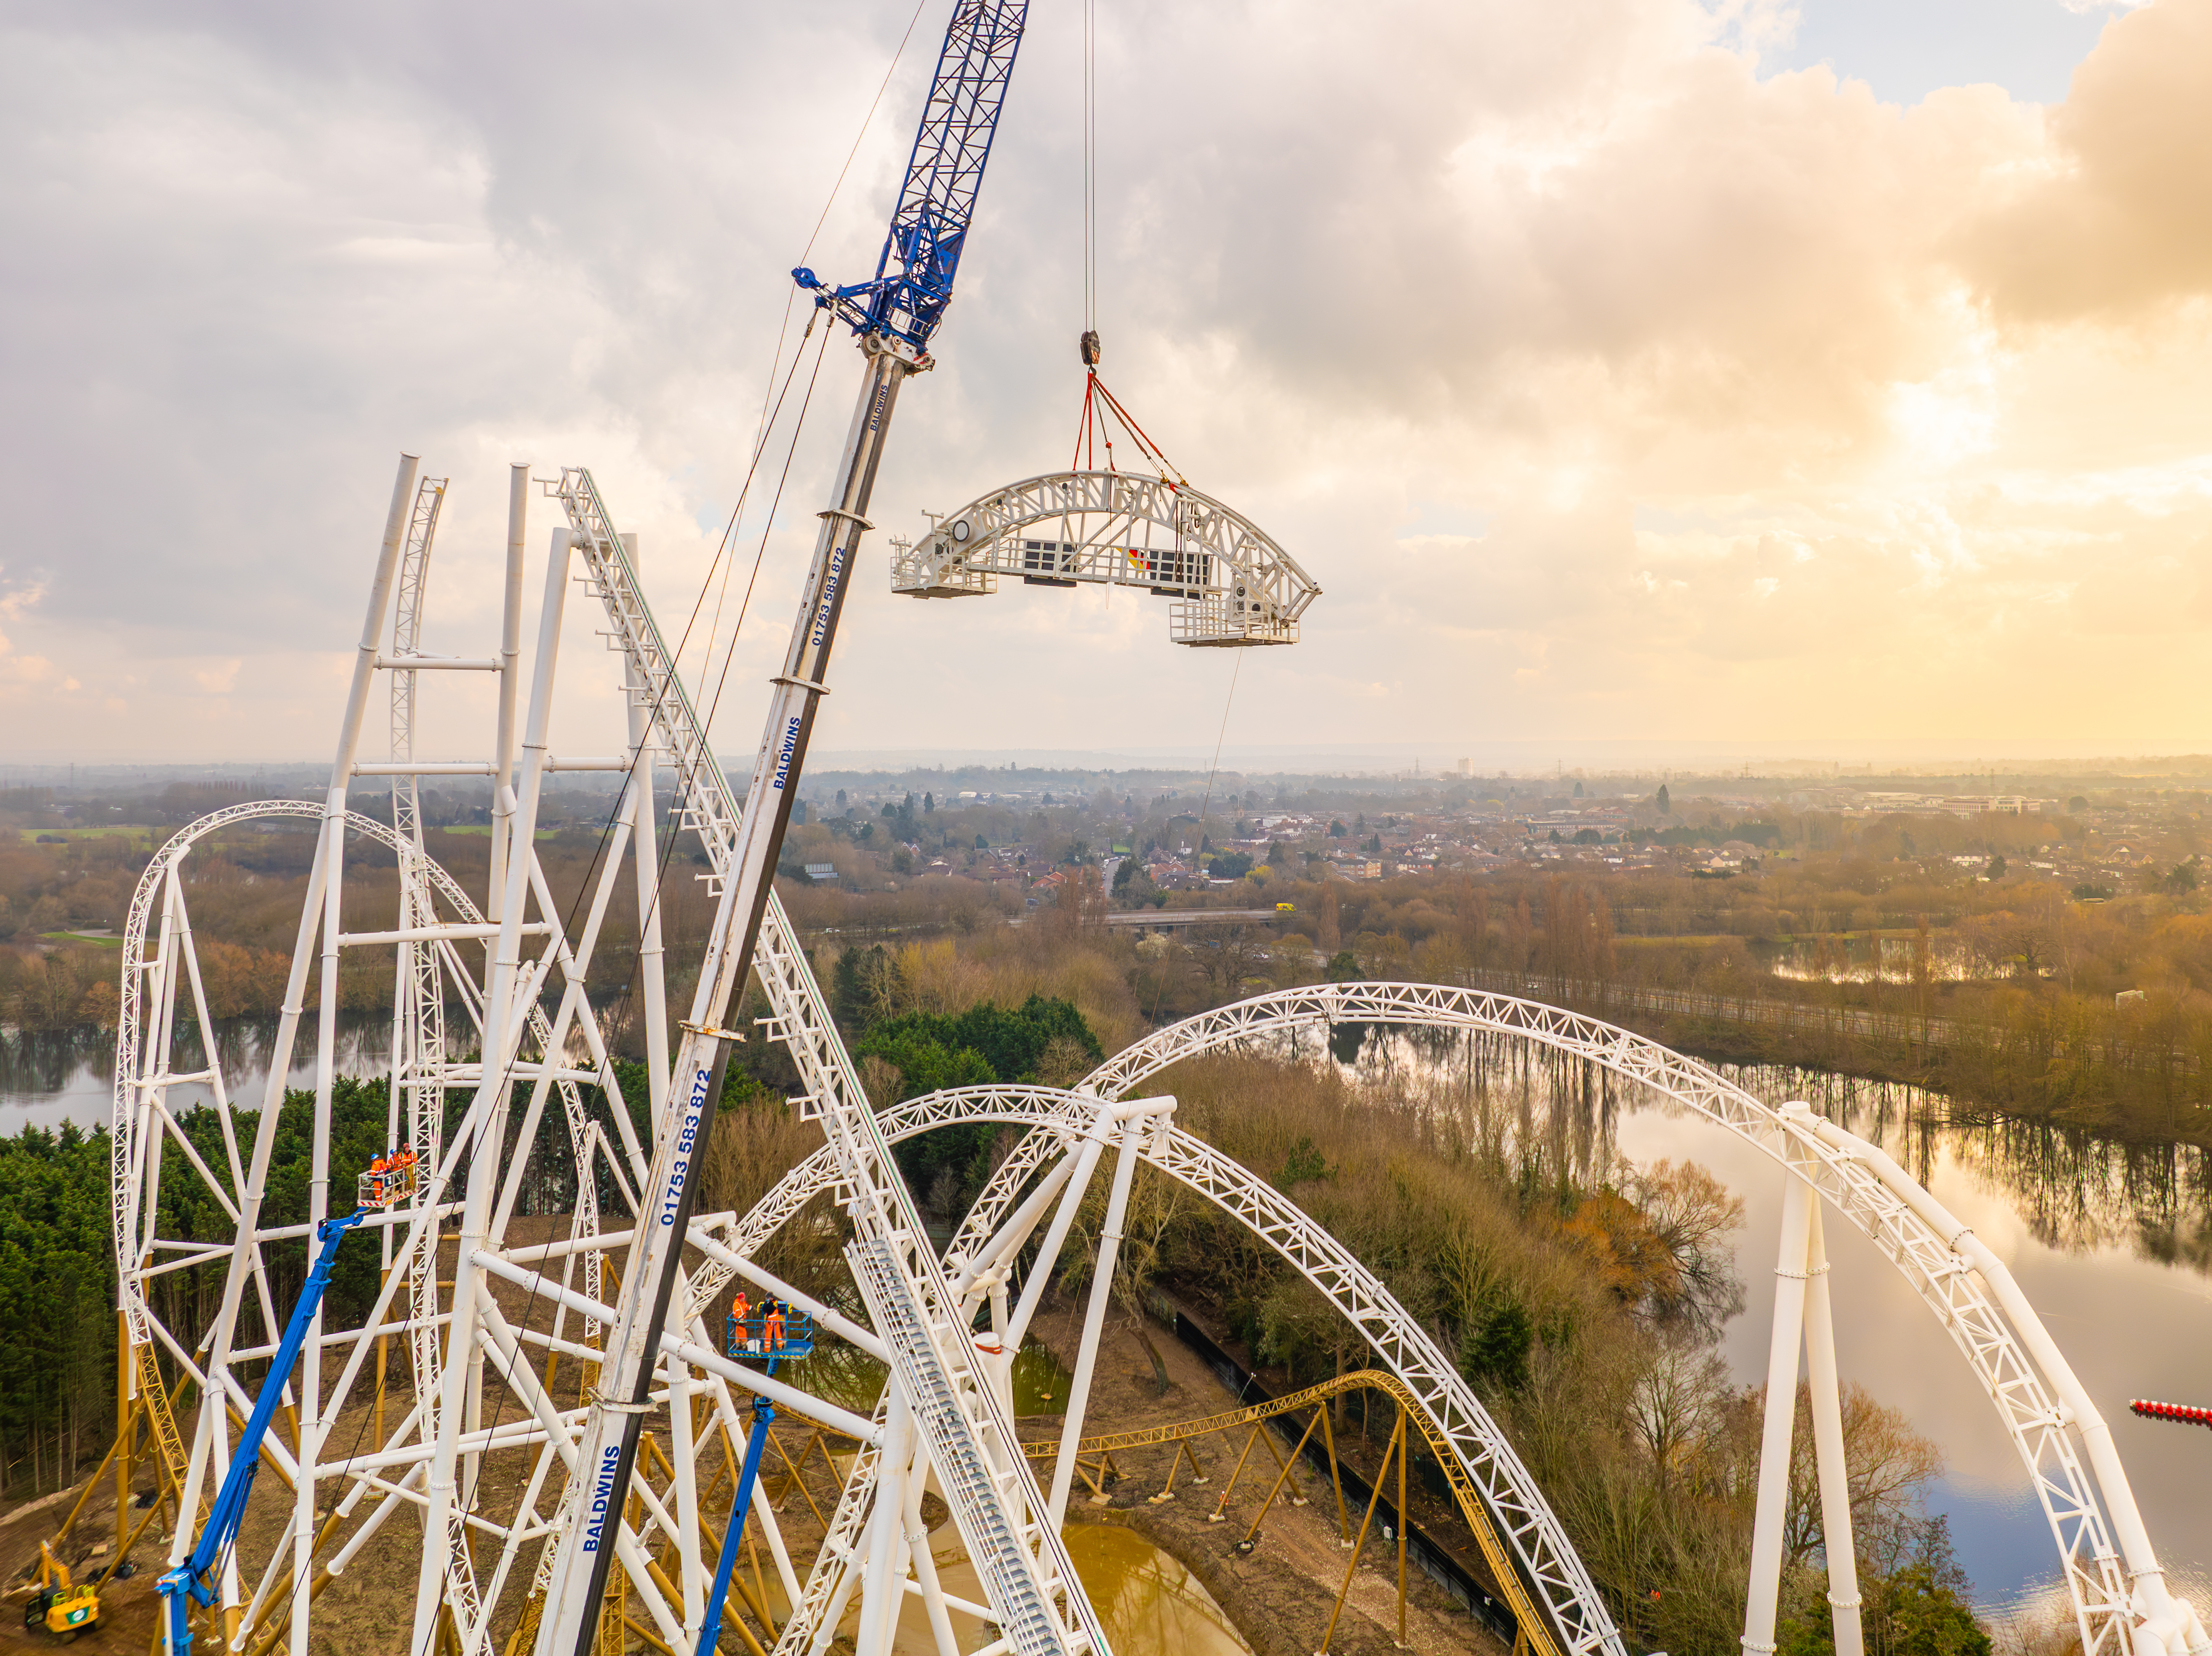 The track is 995.4m long - longer than any other coaster in the UK